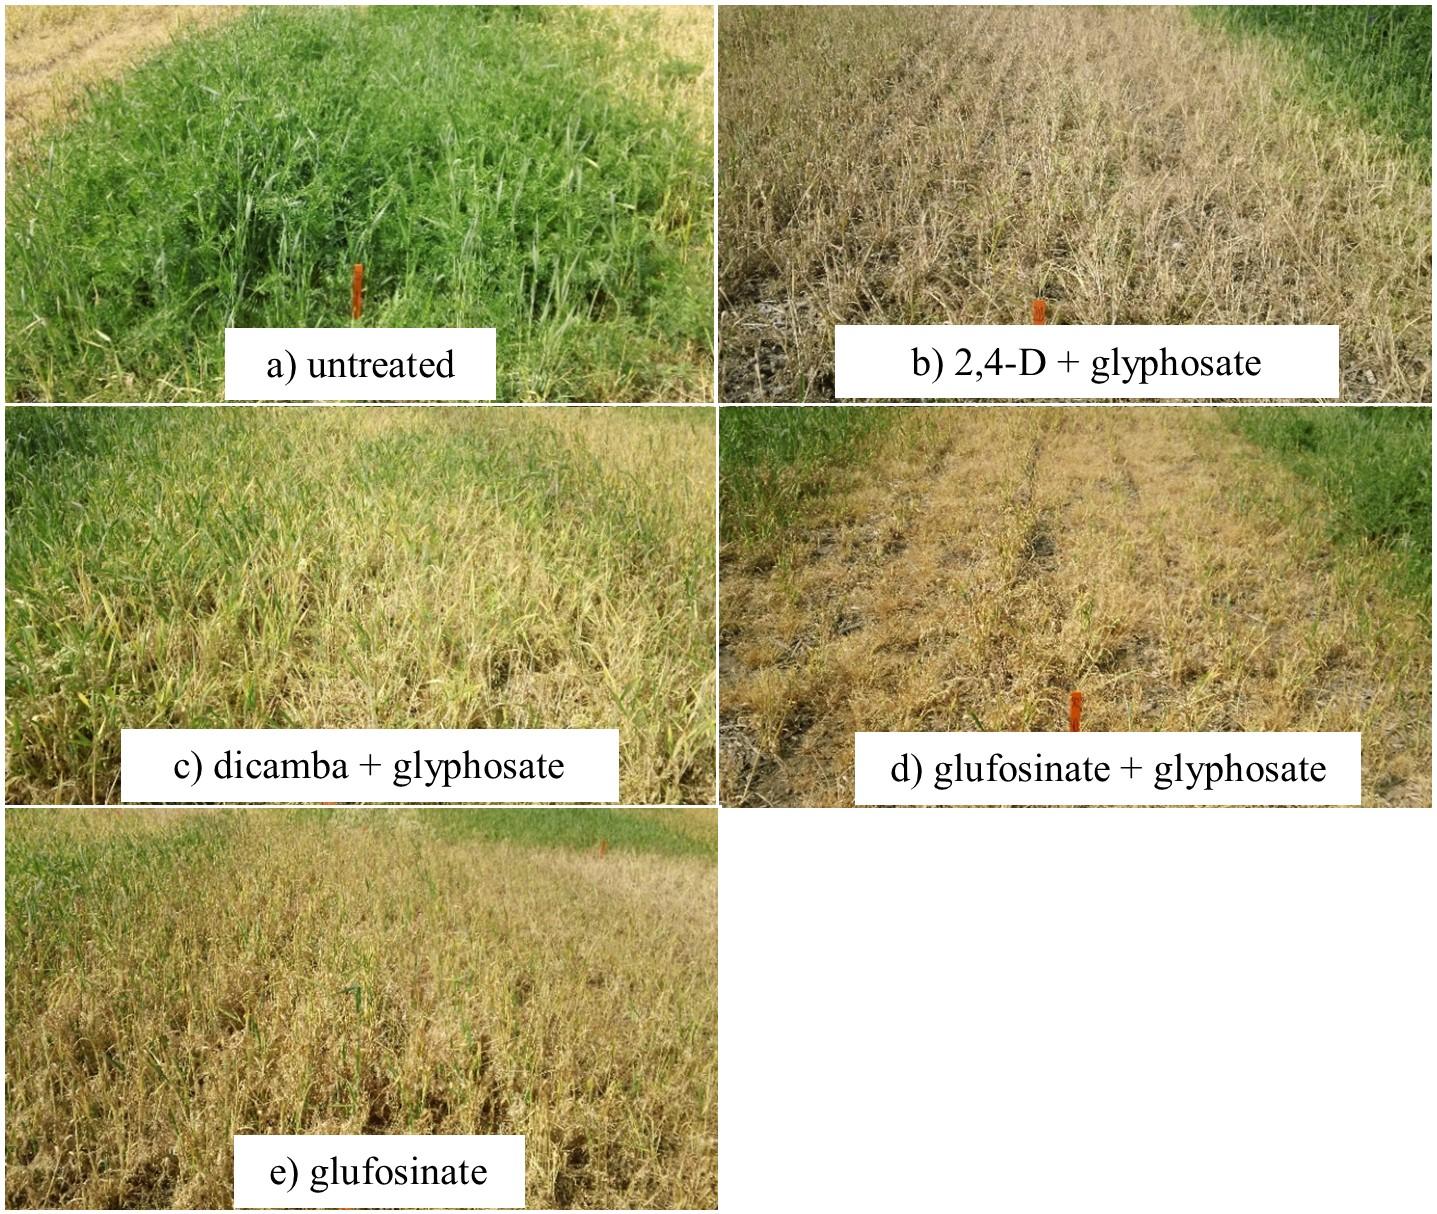 Efficacy of preplant herbicides for managing a rye/vetch cover crop 2 weeks after application